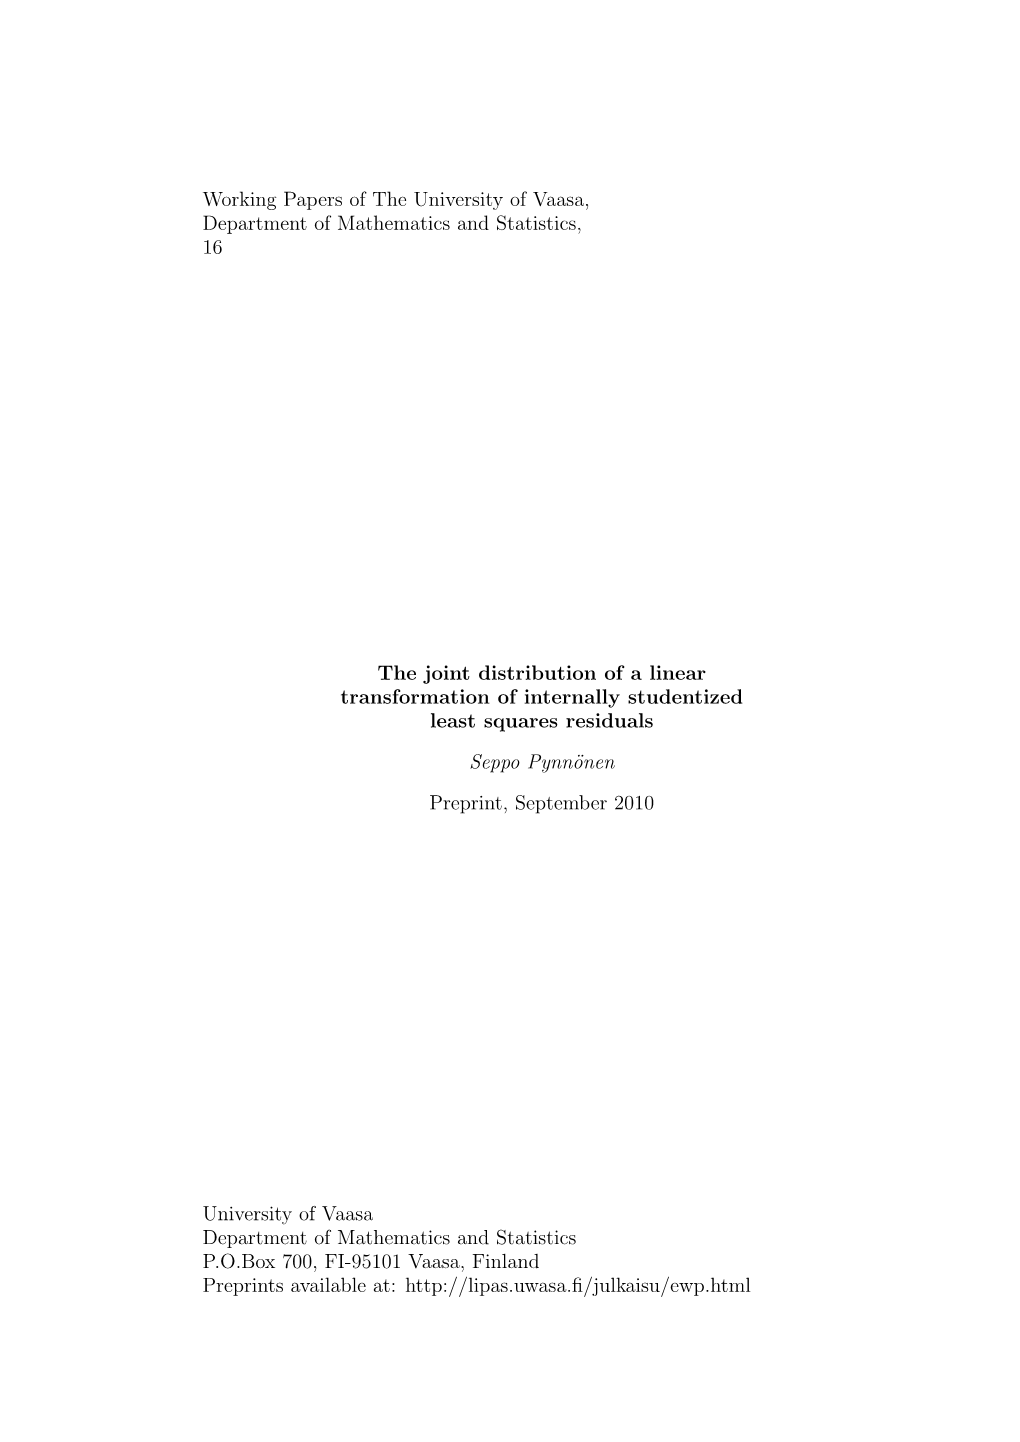 Working Papers of the University of Vaasa, Department of Mathematics and Statistics, 16